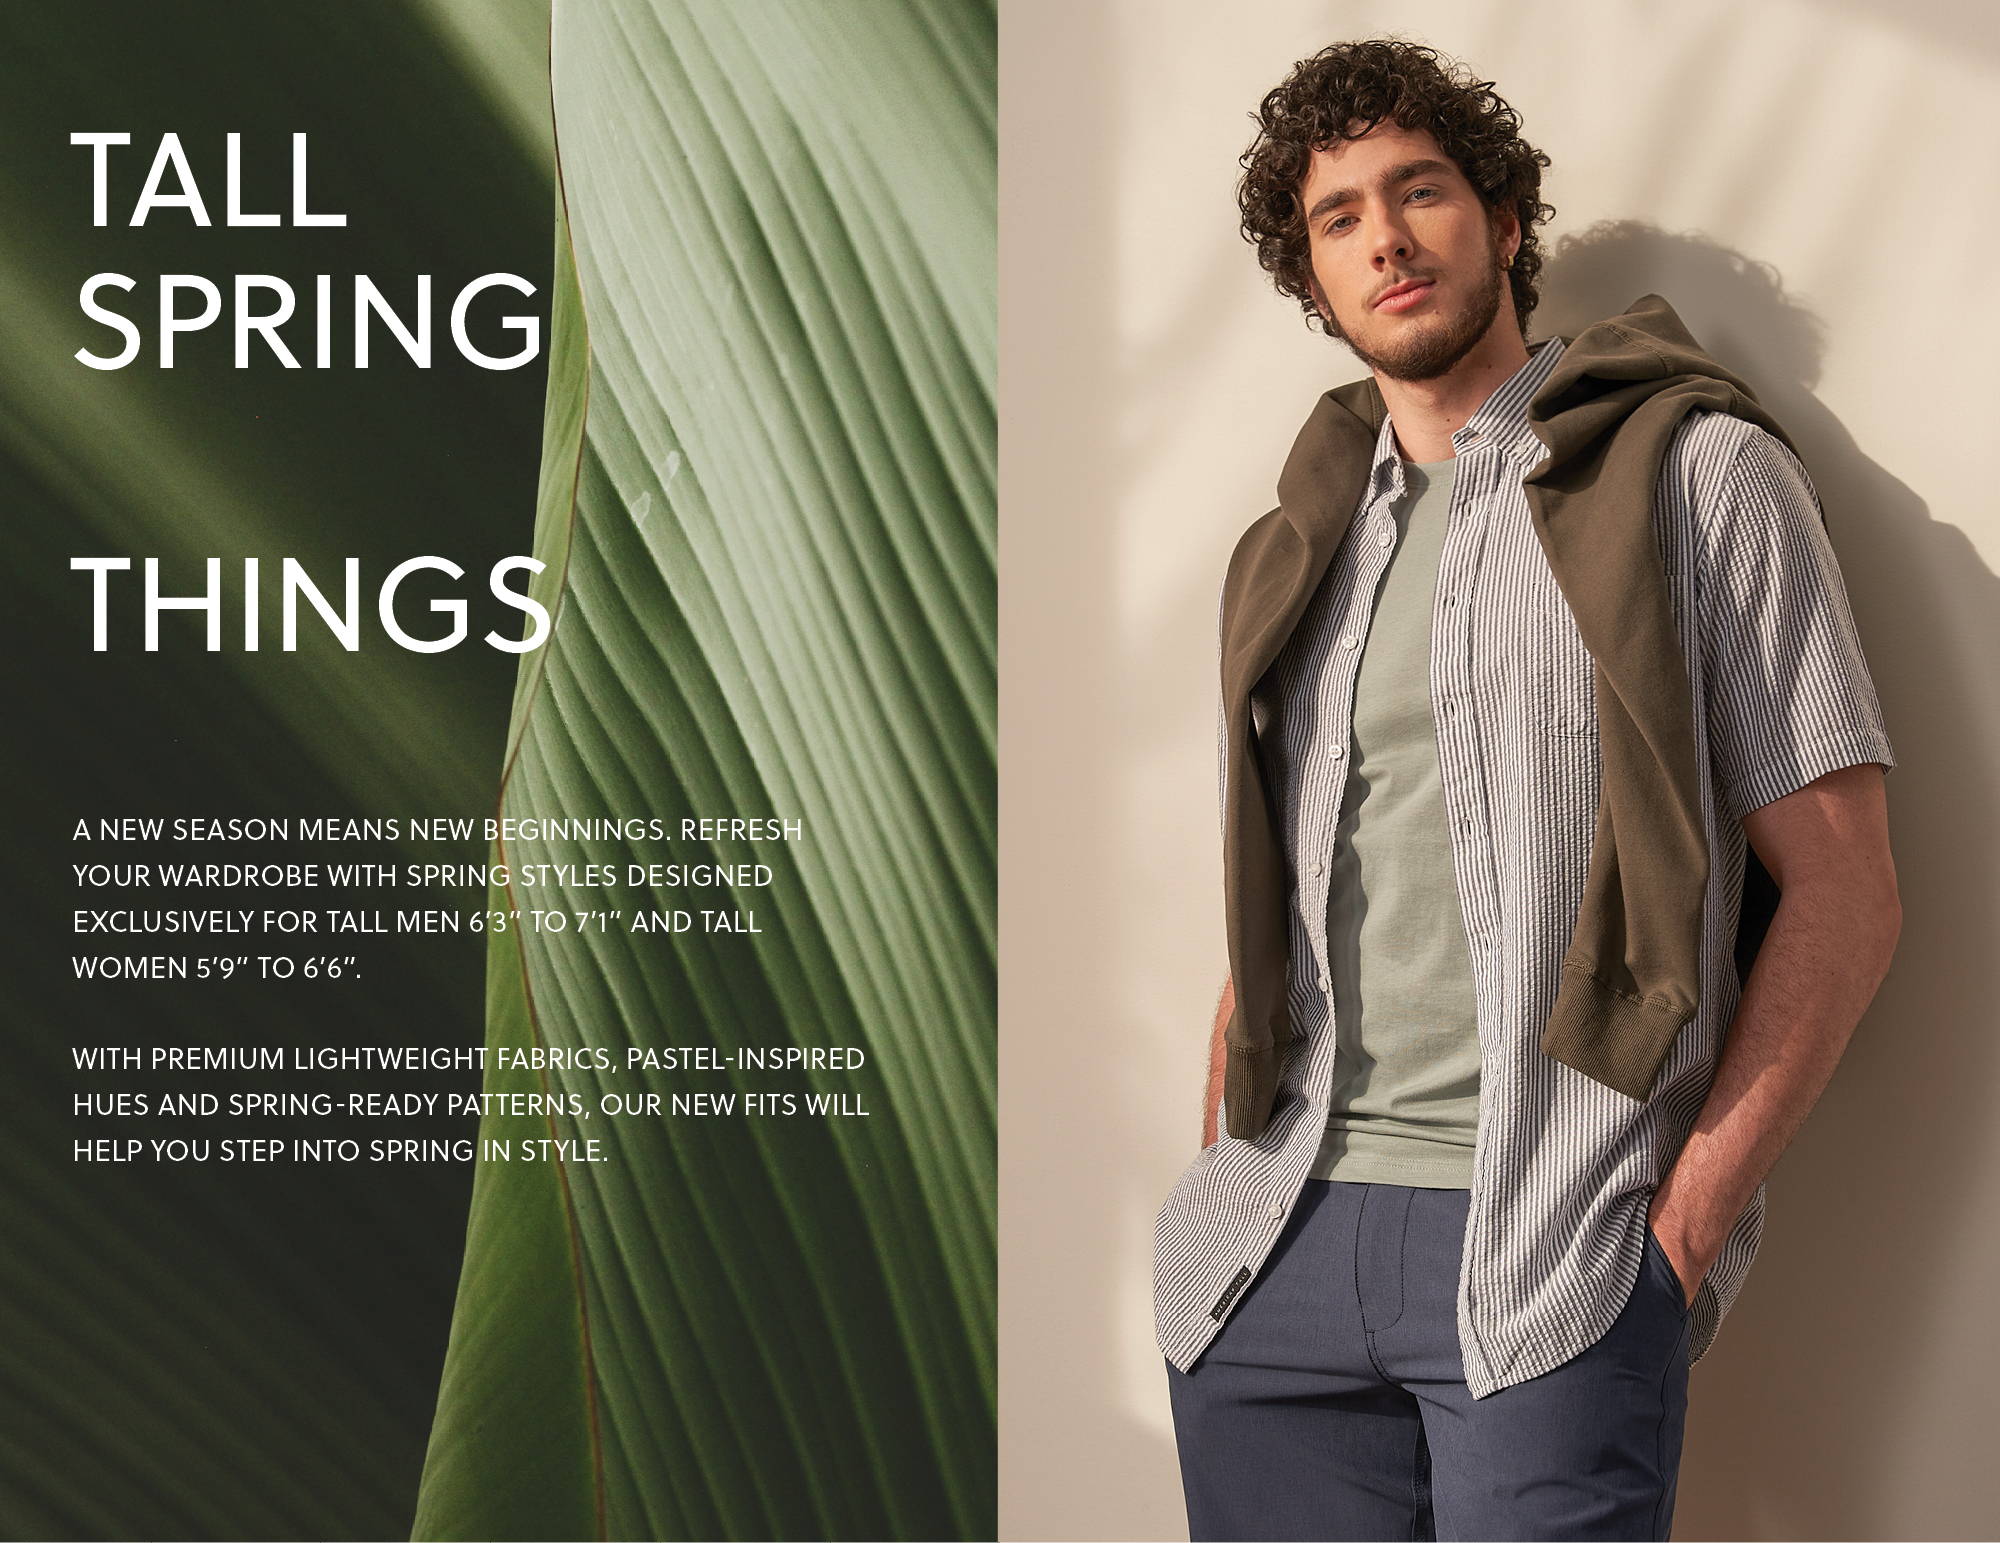 Shop Tall Spring Things. The Spring Collection designed exclusively for tall men and women. 